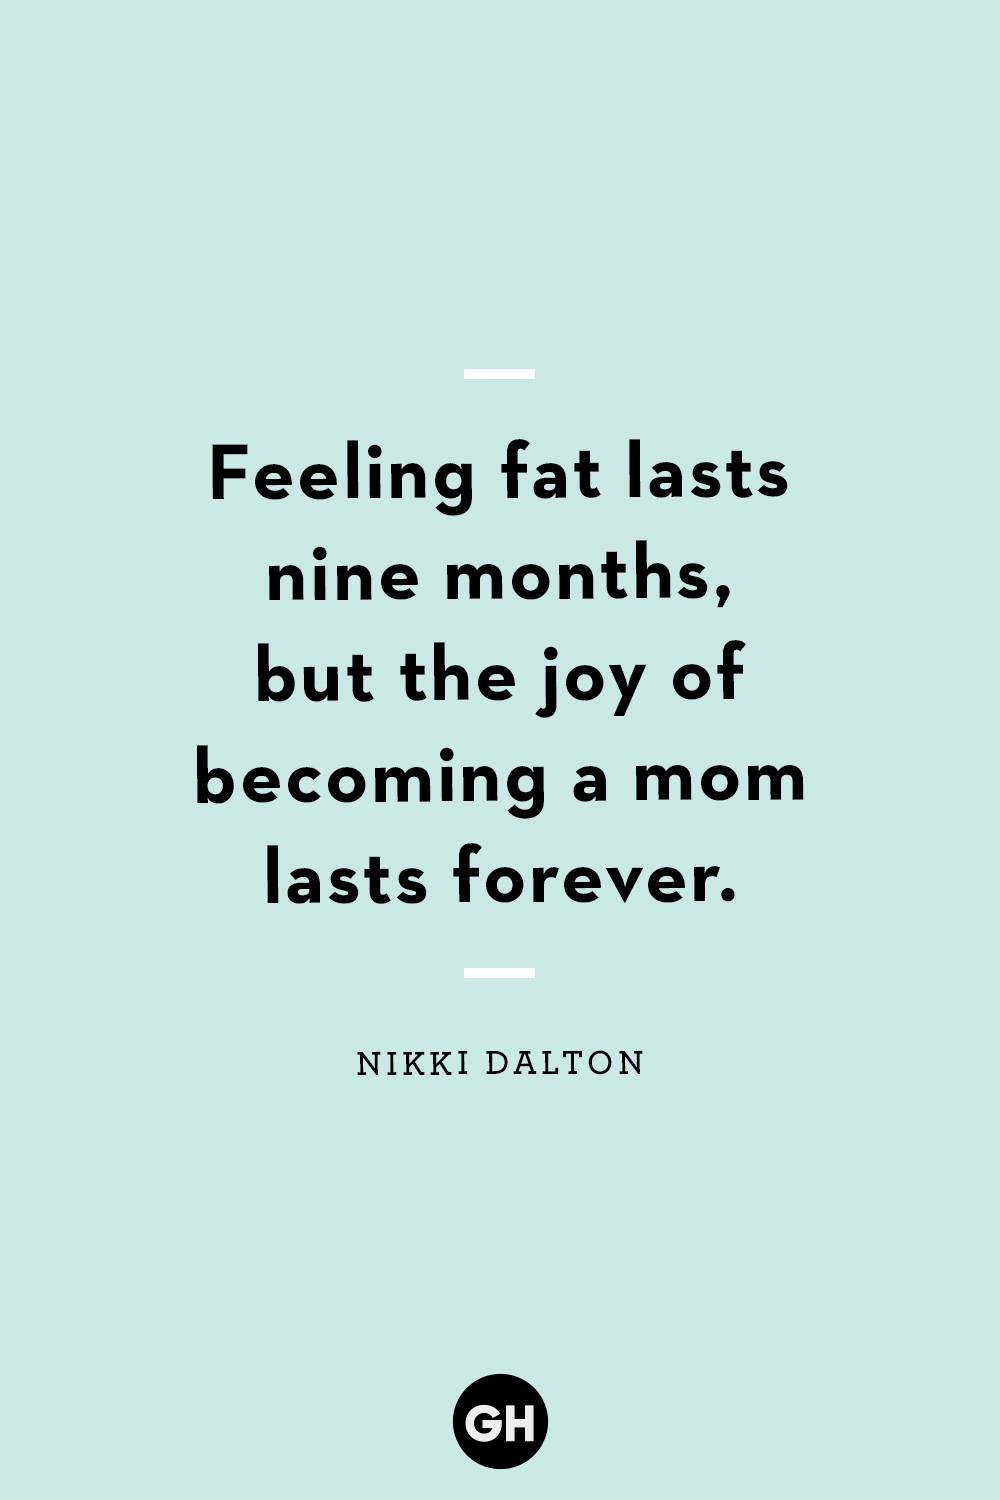 130+ Encouraging & Beautiful Quotes for a New Mother